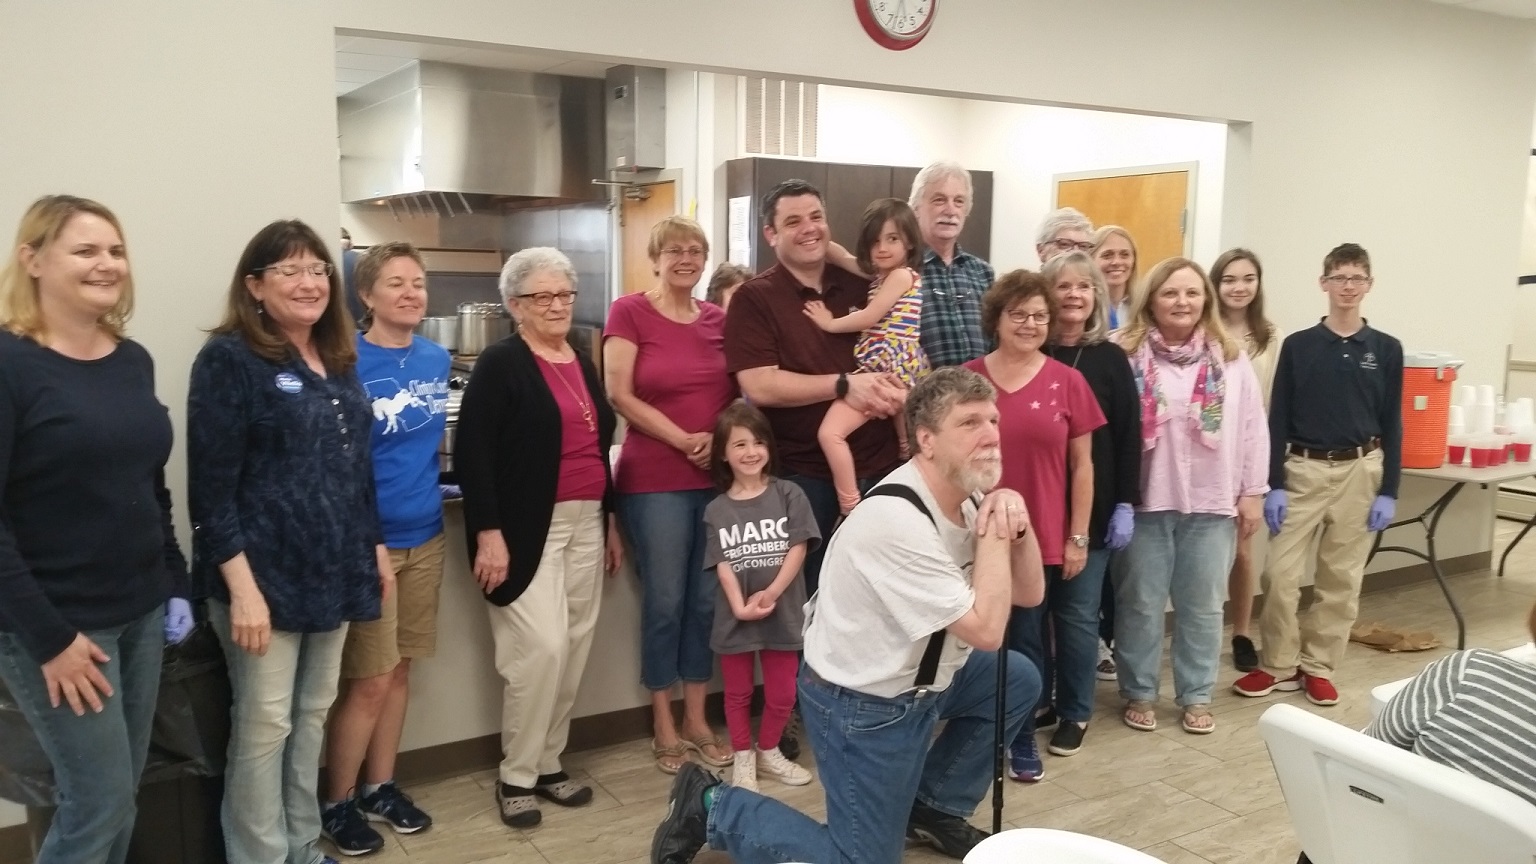 Clinton County Dems raise $1,623 for Relay for Life with Spaghetti Dinner, surpass ...